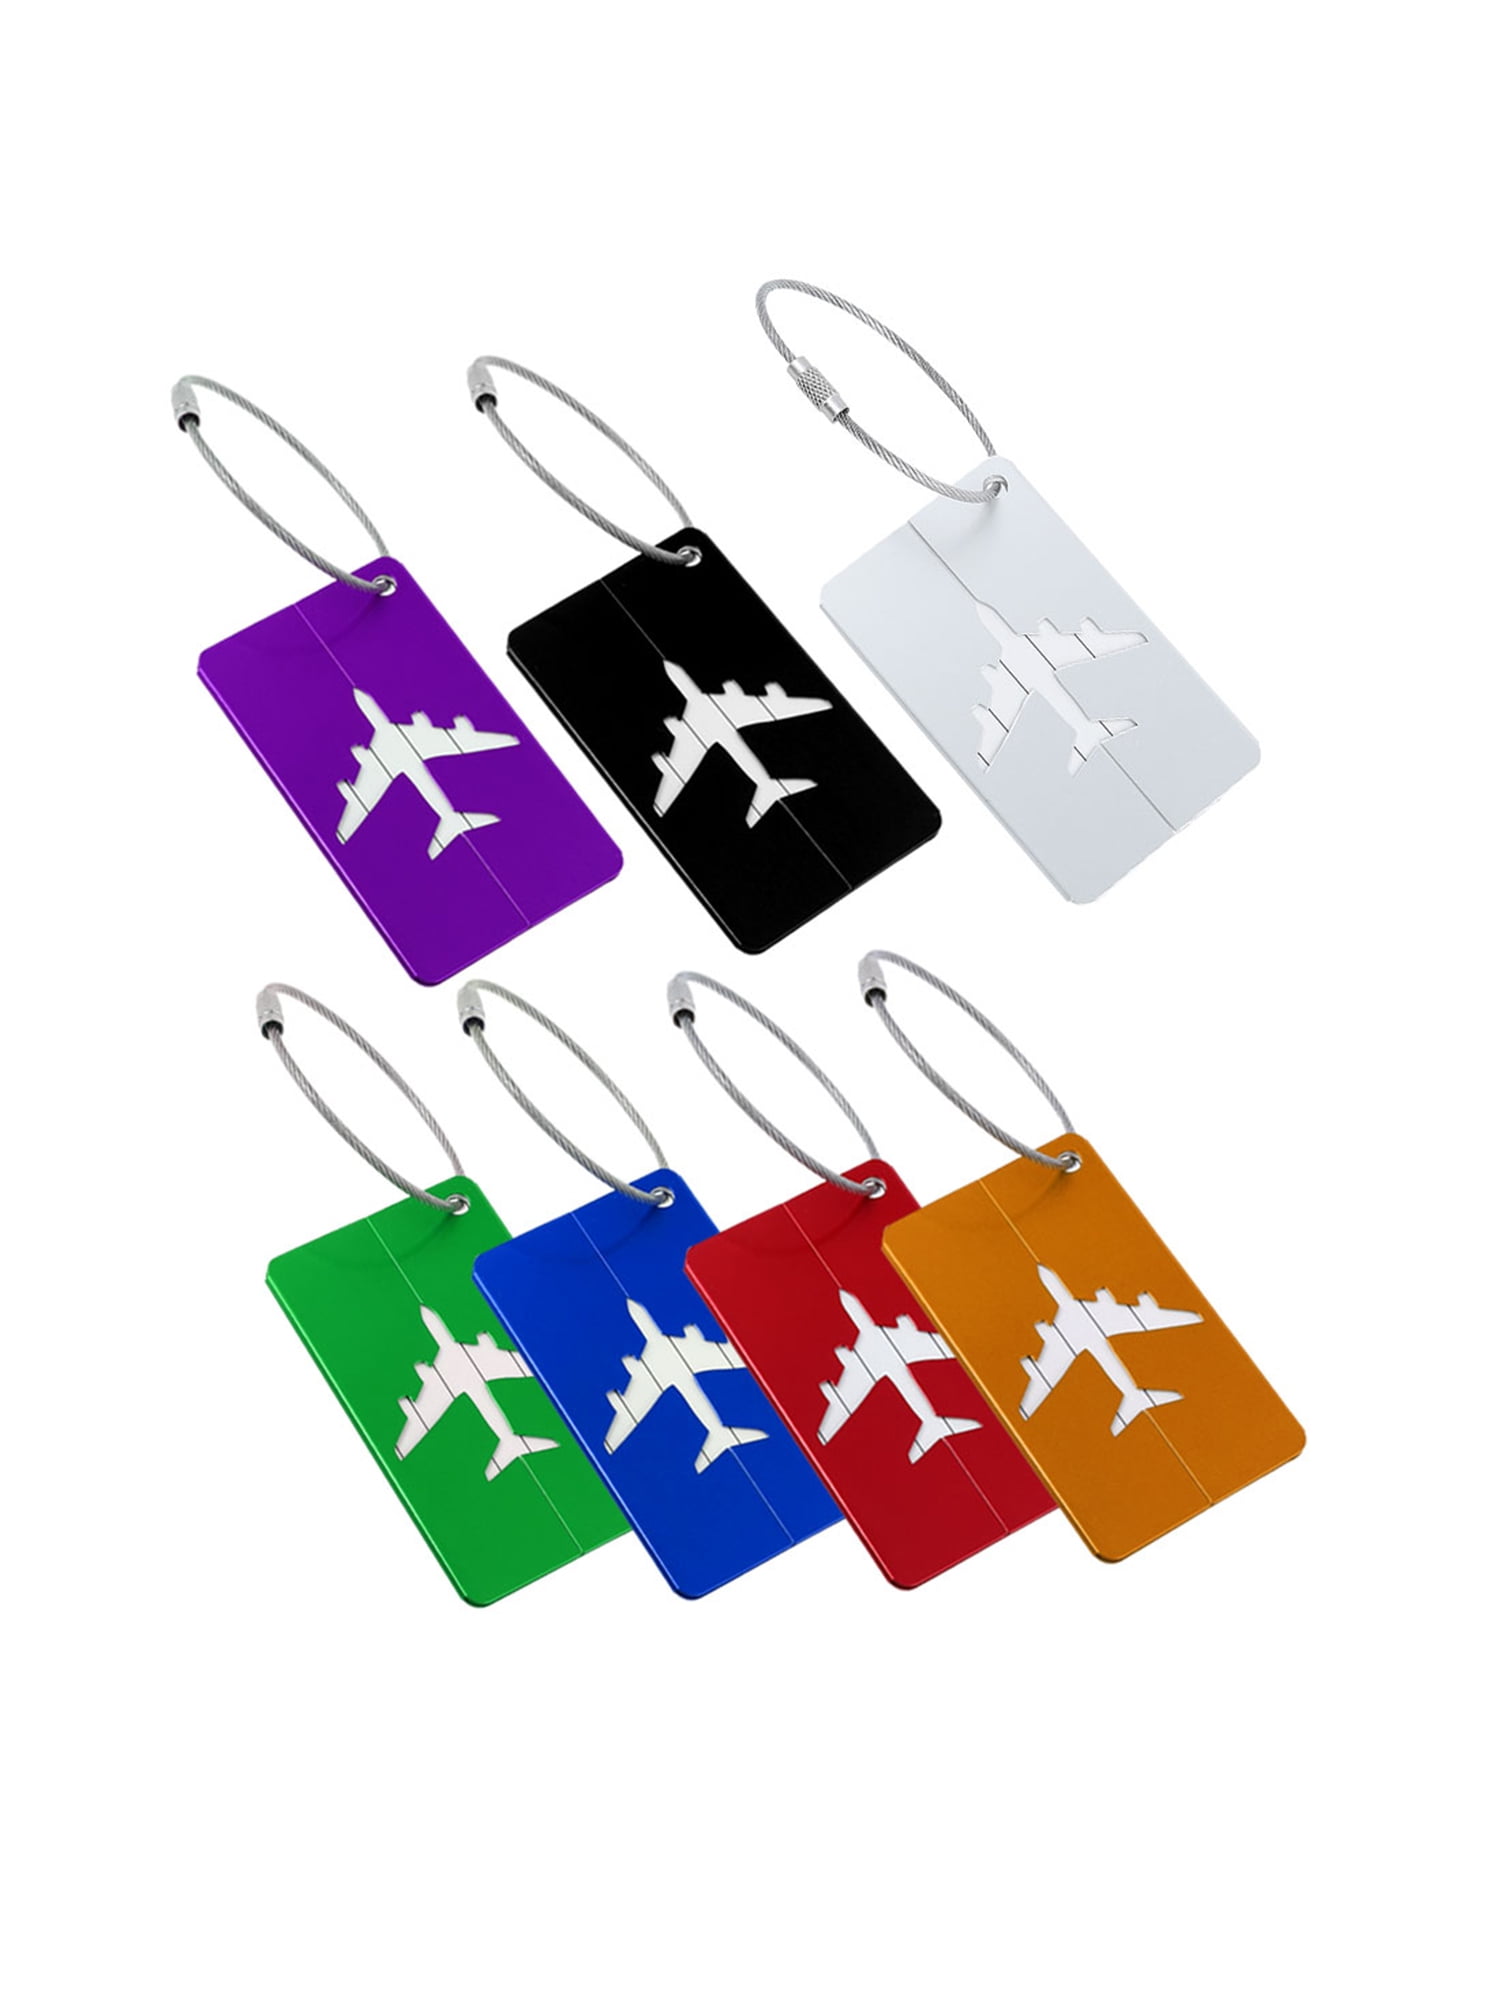 Travel Aluminum Luggage Tags Holders For Baggage Suitcases, 2/7 Pack ...